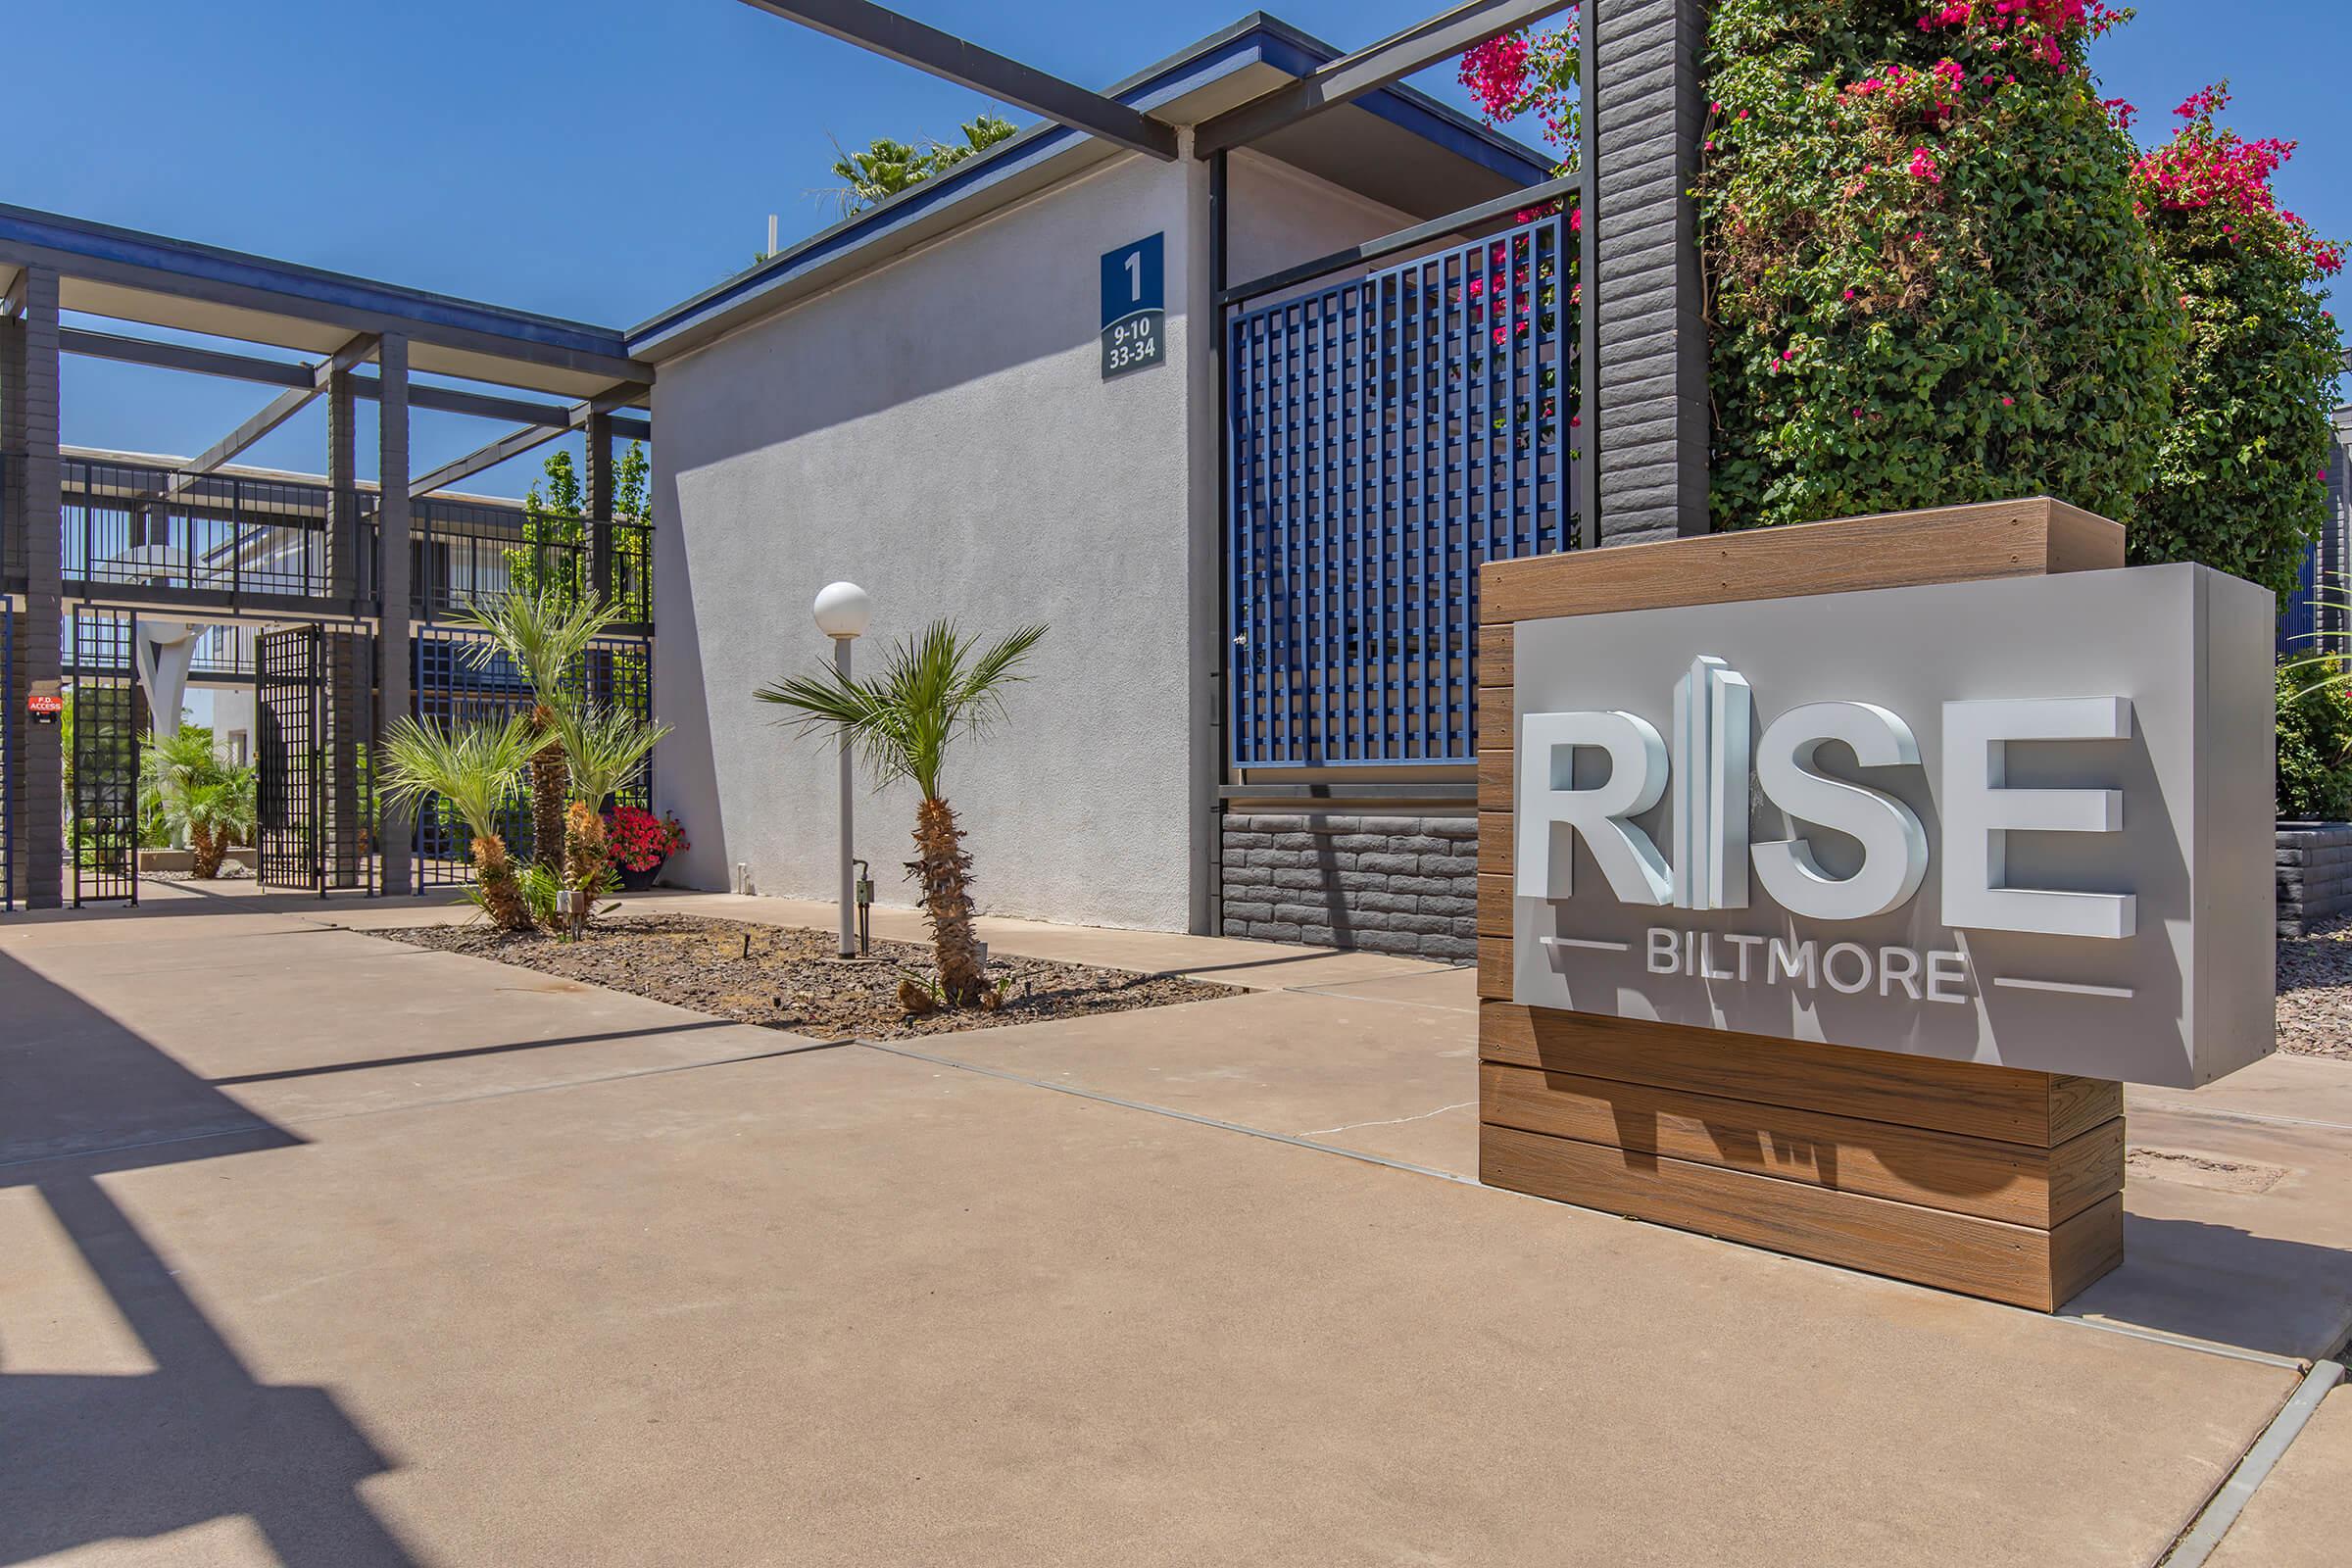 Rise Biltmore outdoor sign by the Phoenix apartments entrance